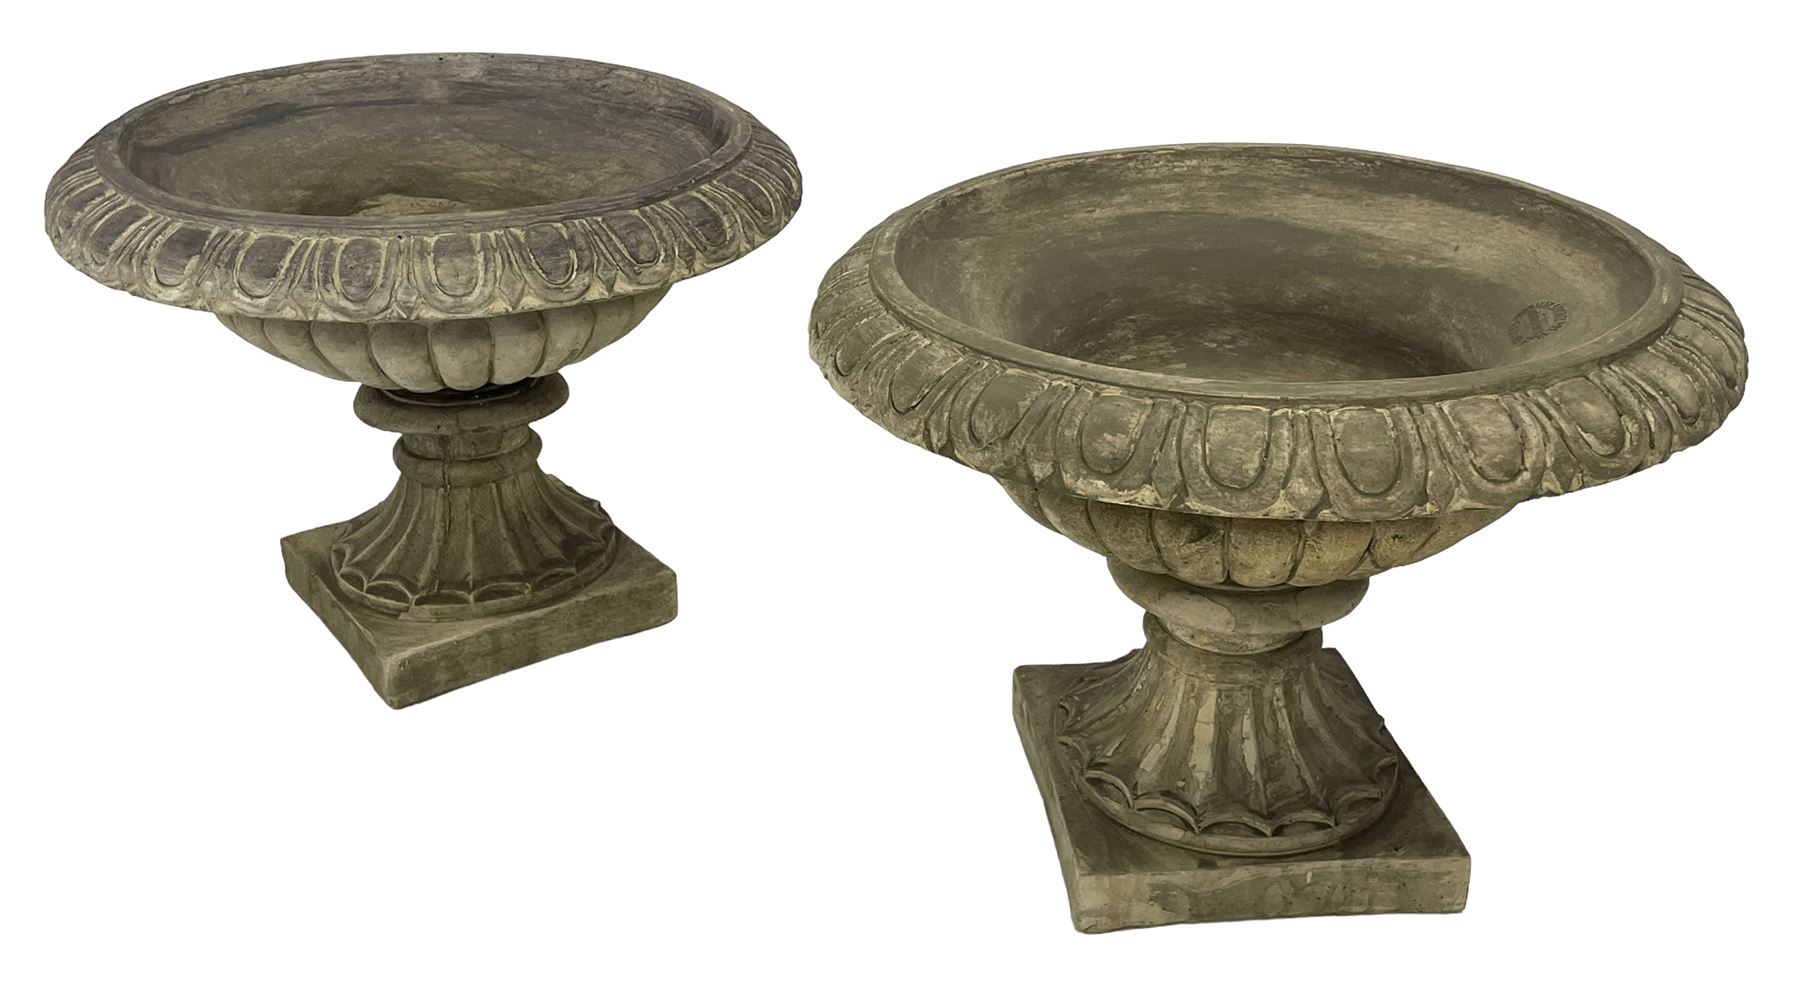 Pair of composite stone classical urn planters